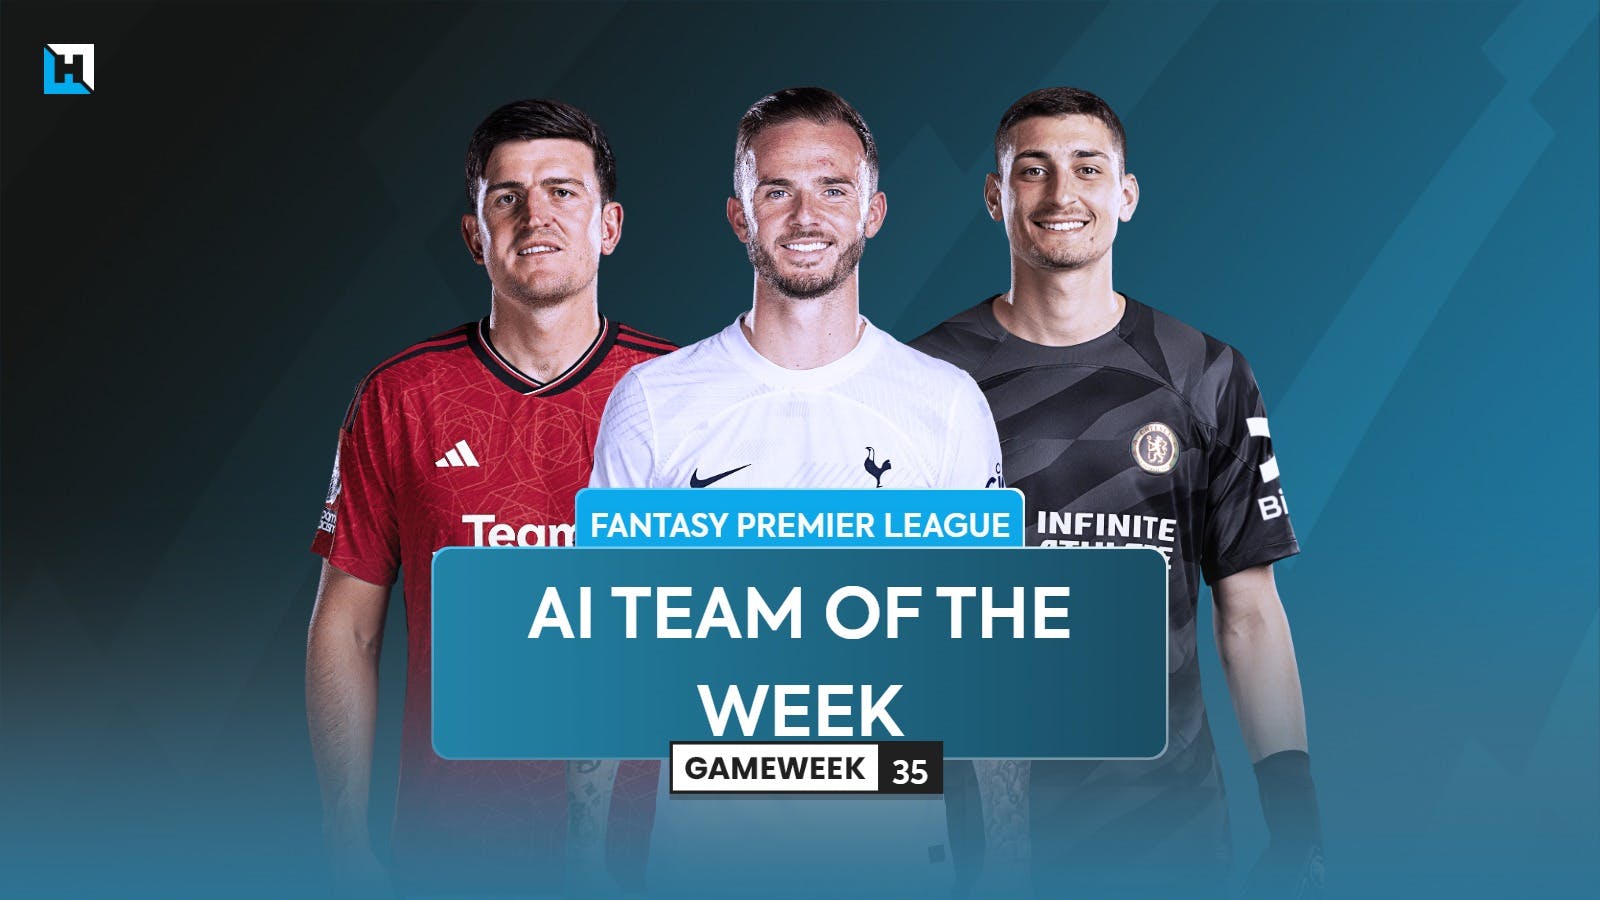 The best FPL team for Double Gameweek 35 according to Hub AI